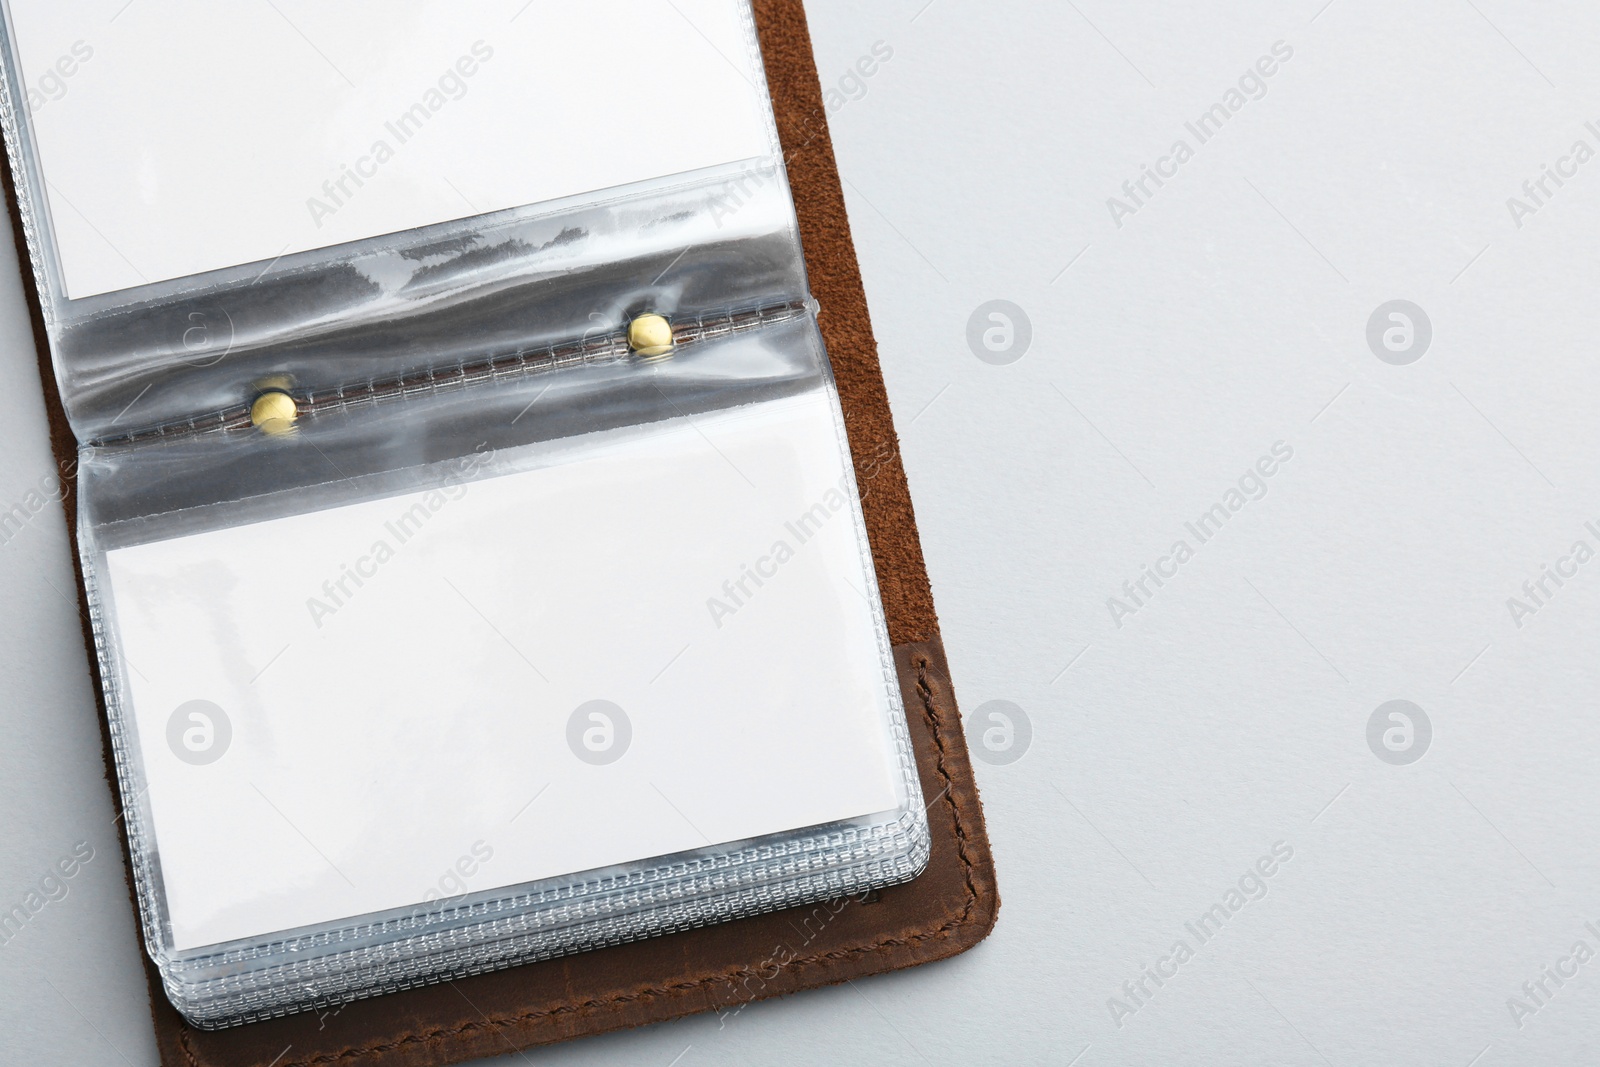 Photo of Leather business card holder with blank cards on light grey background, top view. Space for text